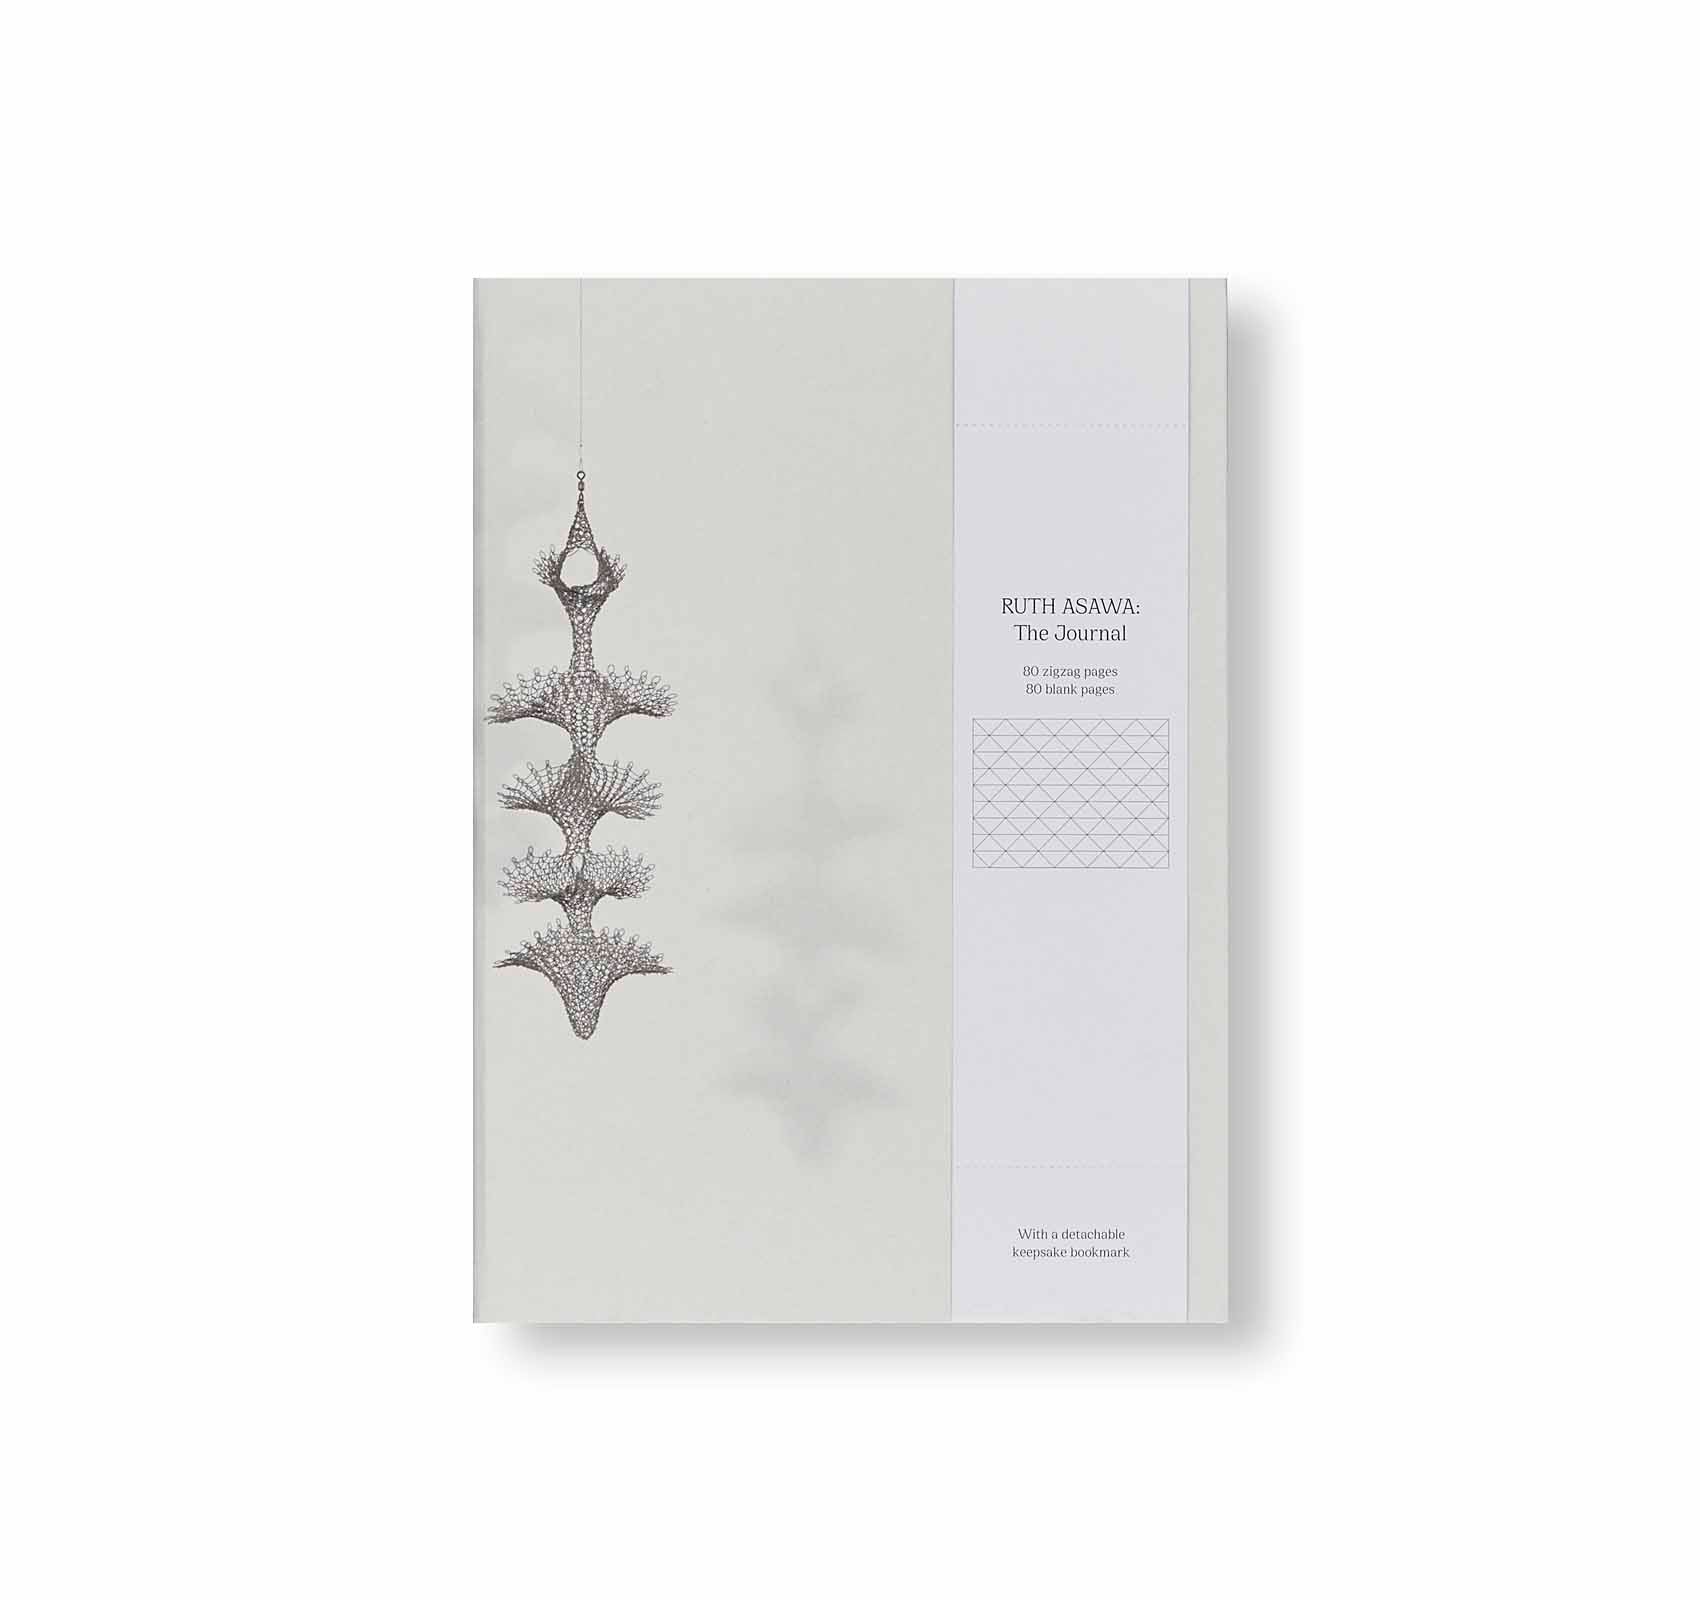 THE JOURNAL by Ruth Asawa